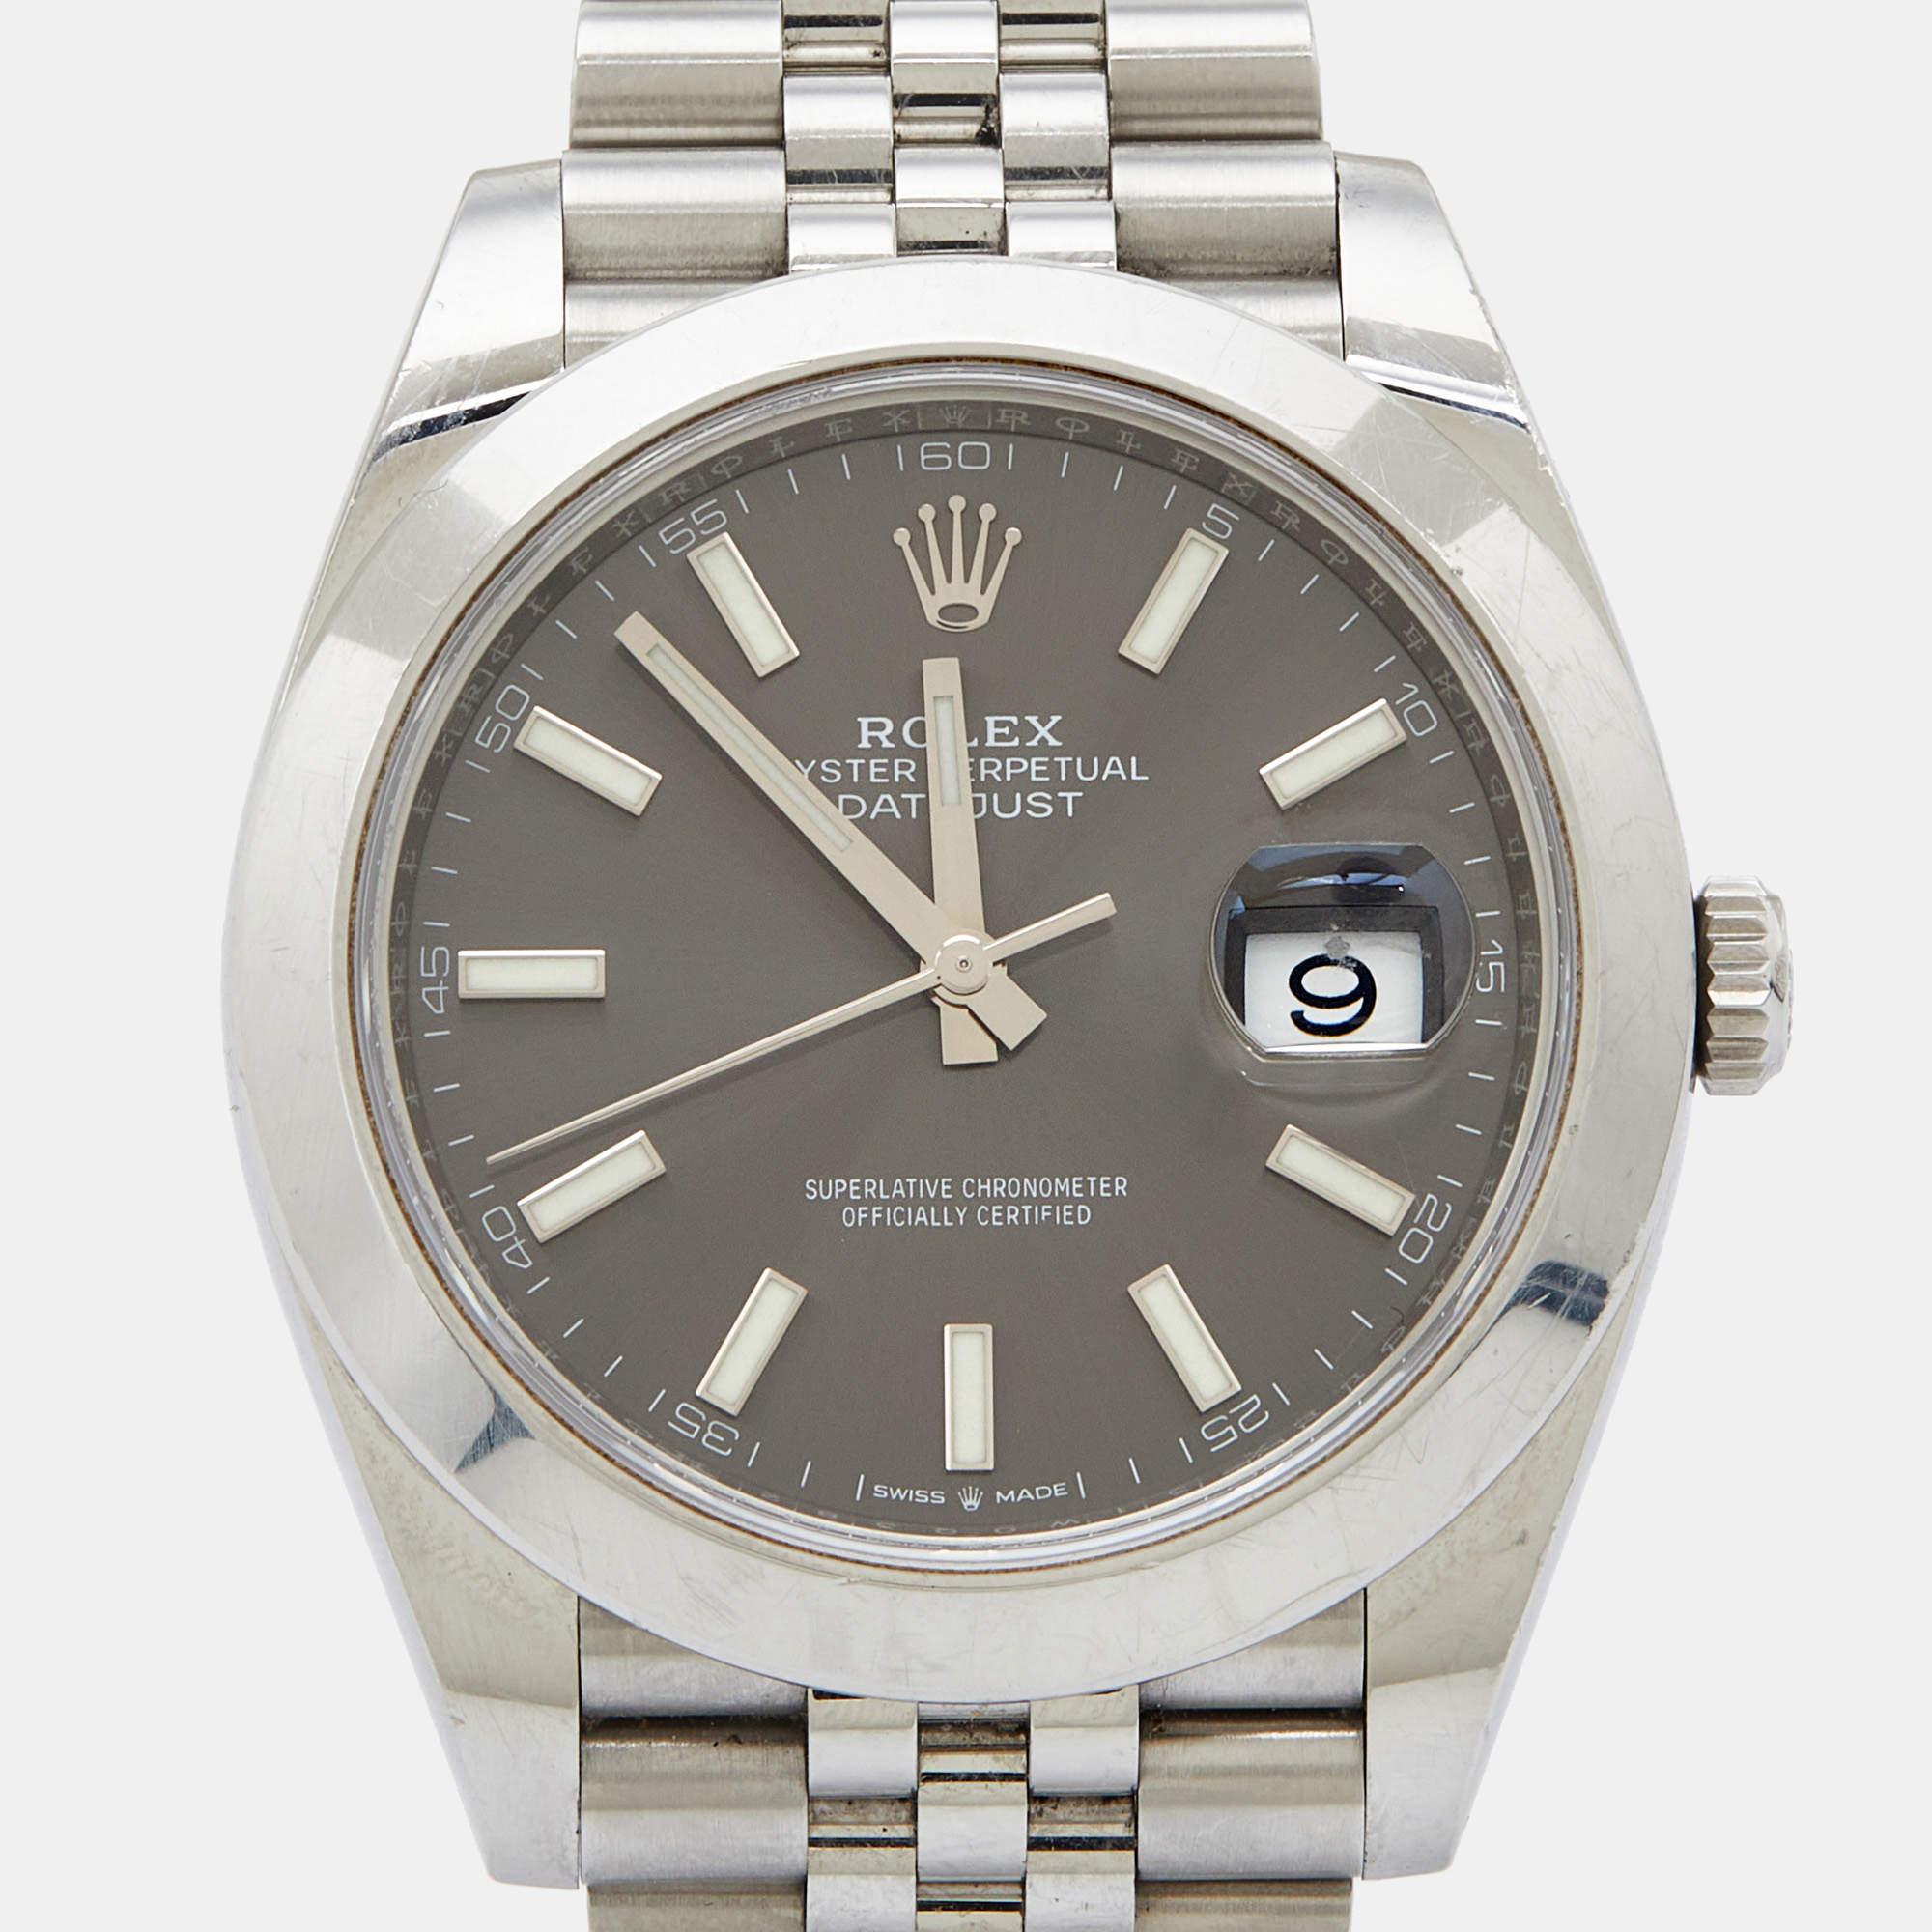 The Datejust is one of the most recognized and coveted watches from the house of Rolex. It has a distinct look and an irrefutable appeal. Crafted in stainless steel, this Rolex Datejust 126300 wristwatch for men has the signature allure. The